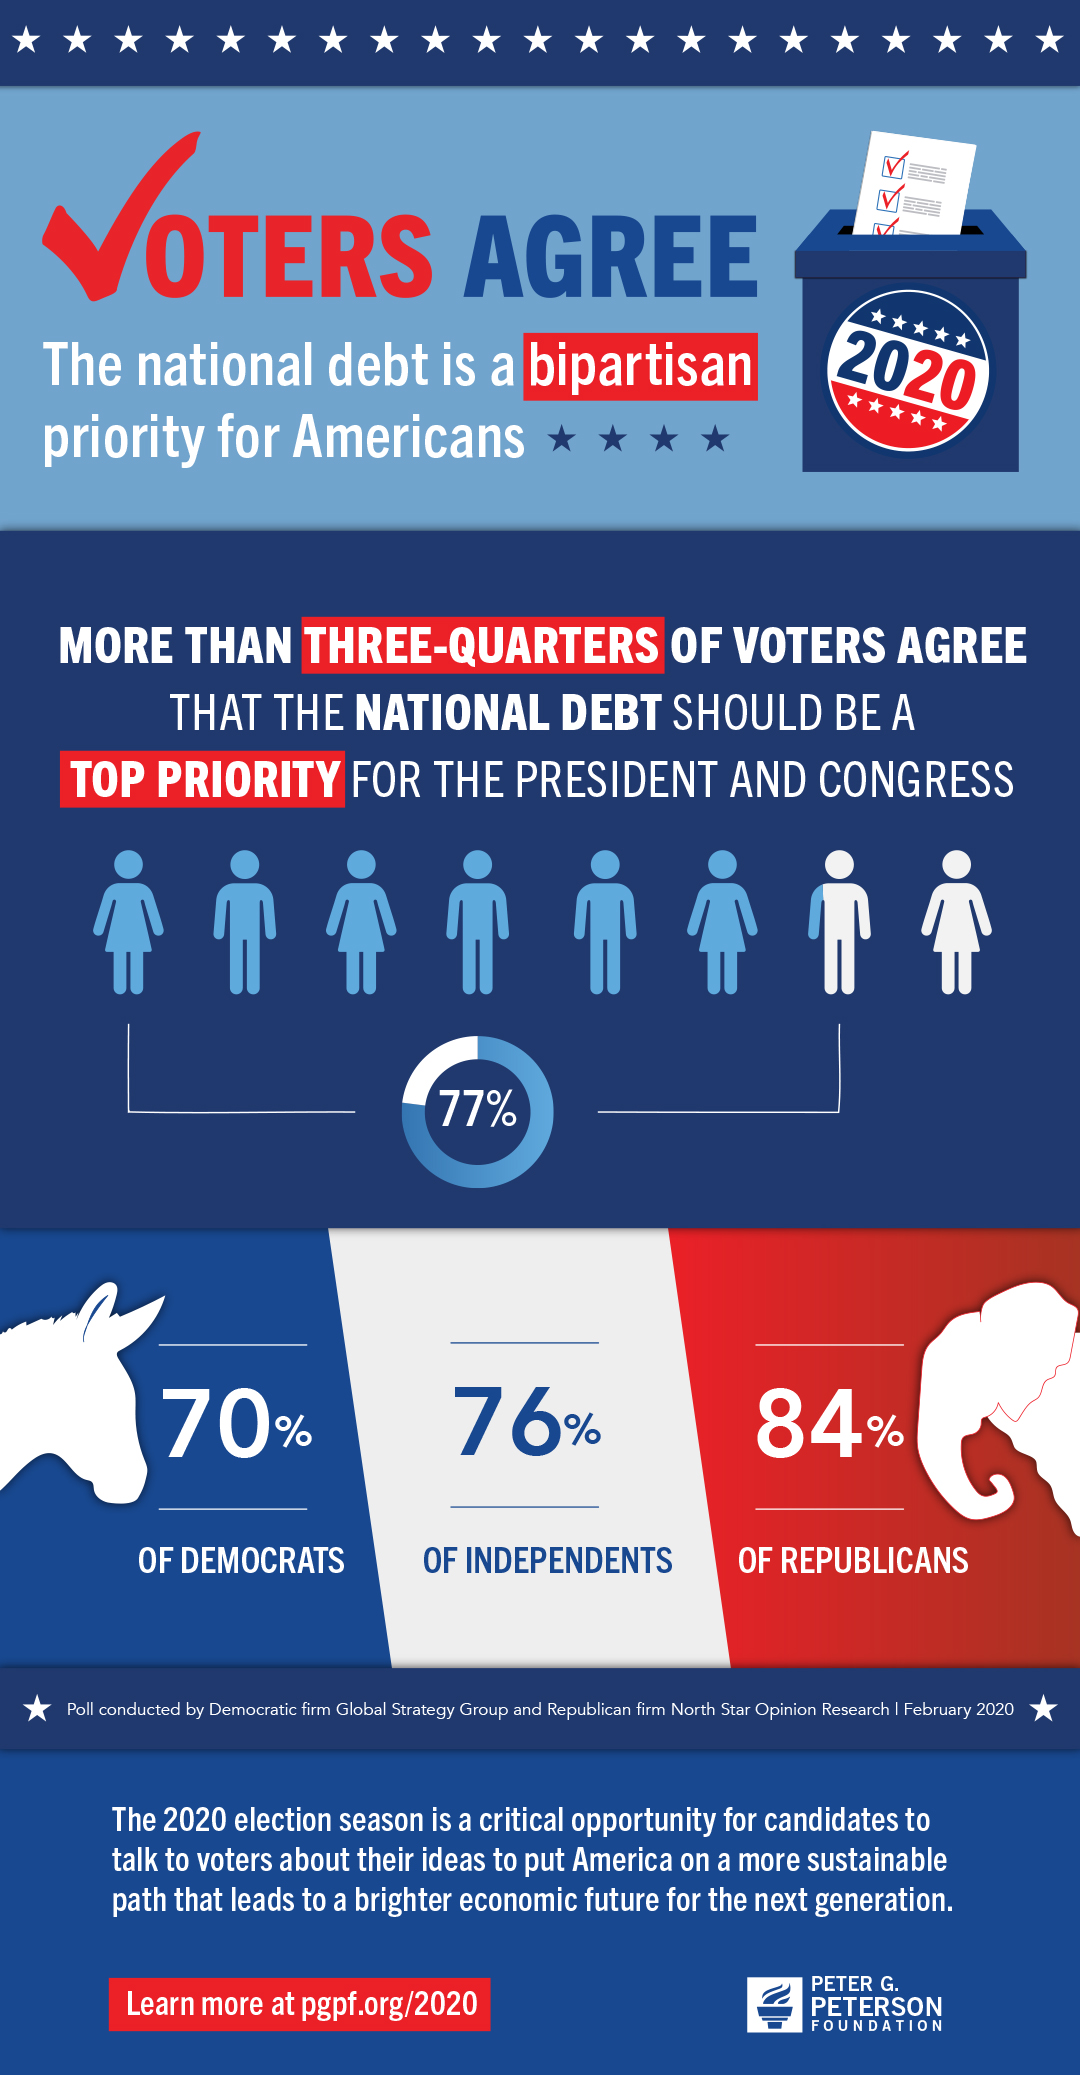 A broad, bipartisan majority of voters agree that the national debt is a key issue for the 2020 campaign.   